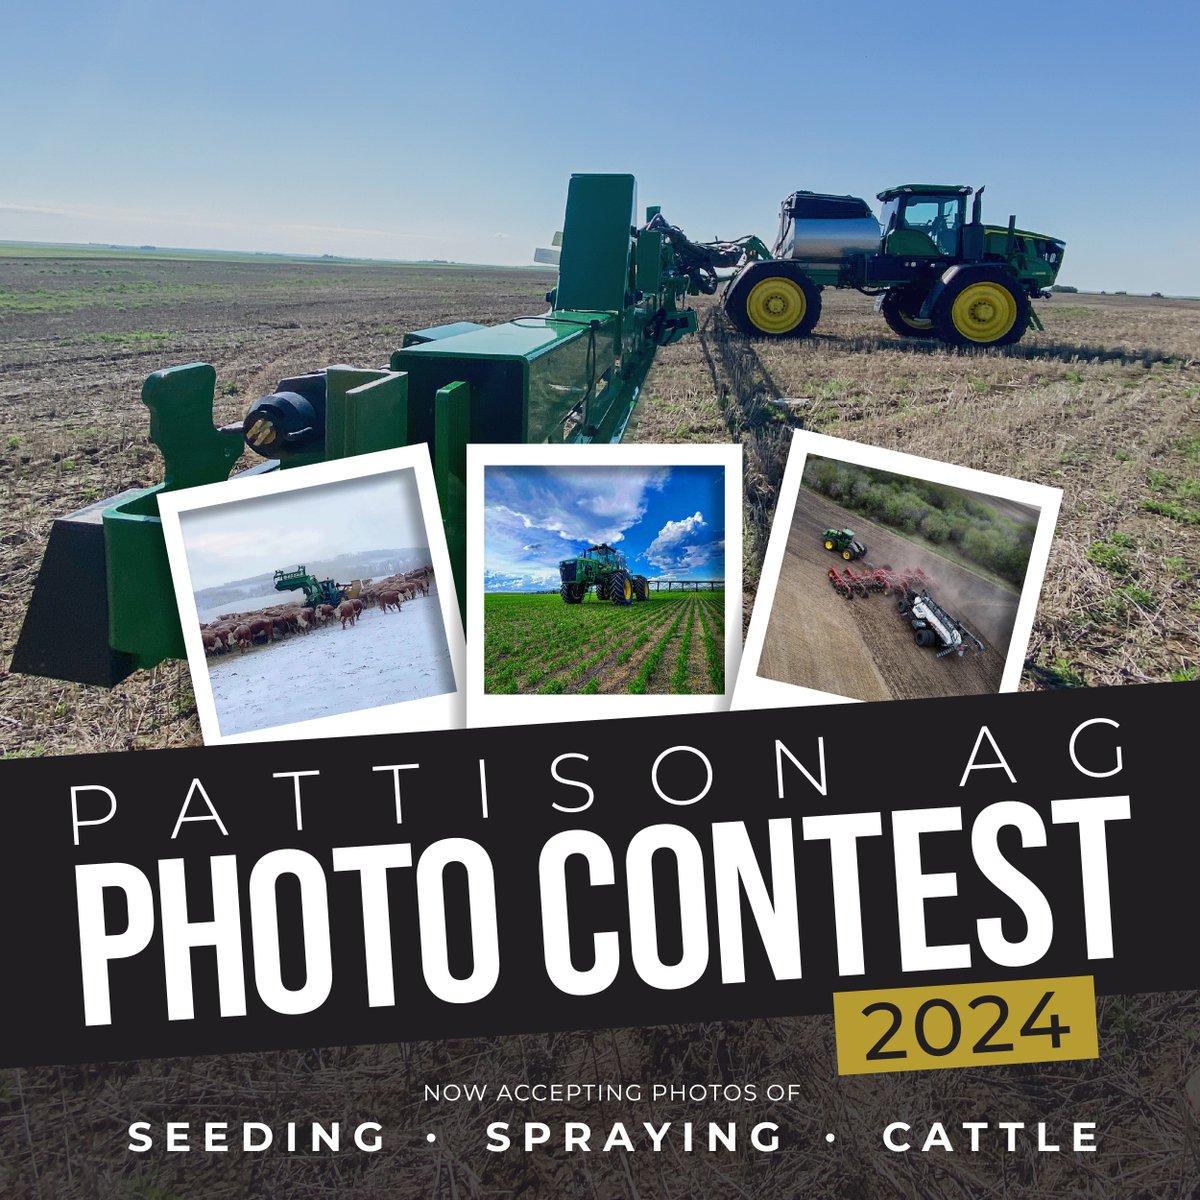 Submit your best seeding, spraying, or cattle photos featuring your John Deere Equipment for a chance to win! Contest closes June 20, 2024. Submit Here: ow.ly/6cCV50RbE9r #PattisonAg #PattisonAgPhotoContest24